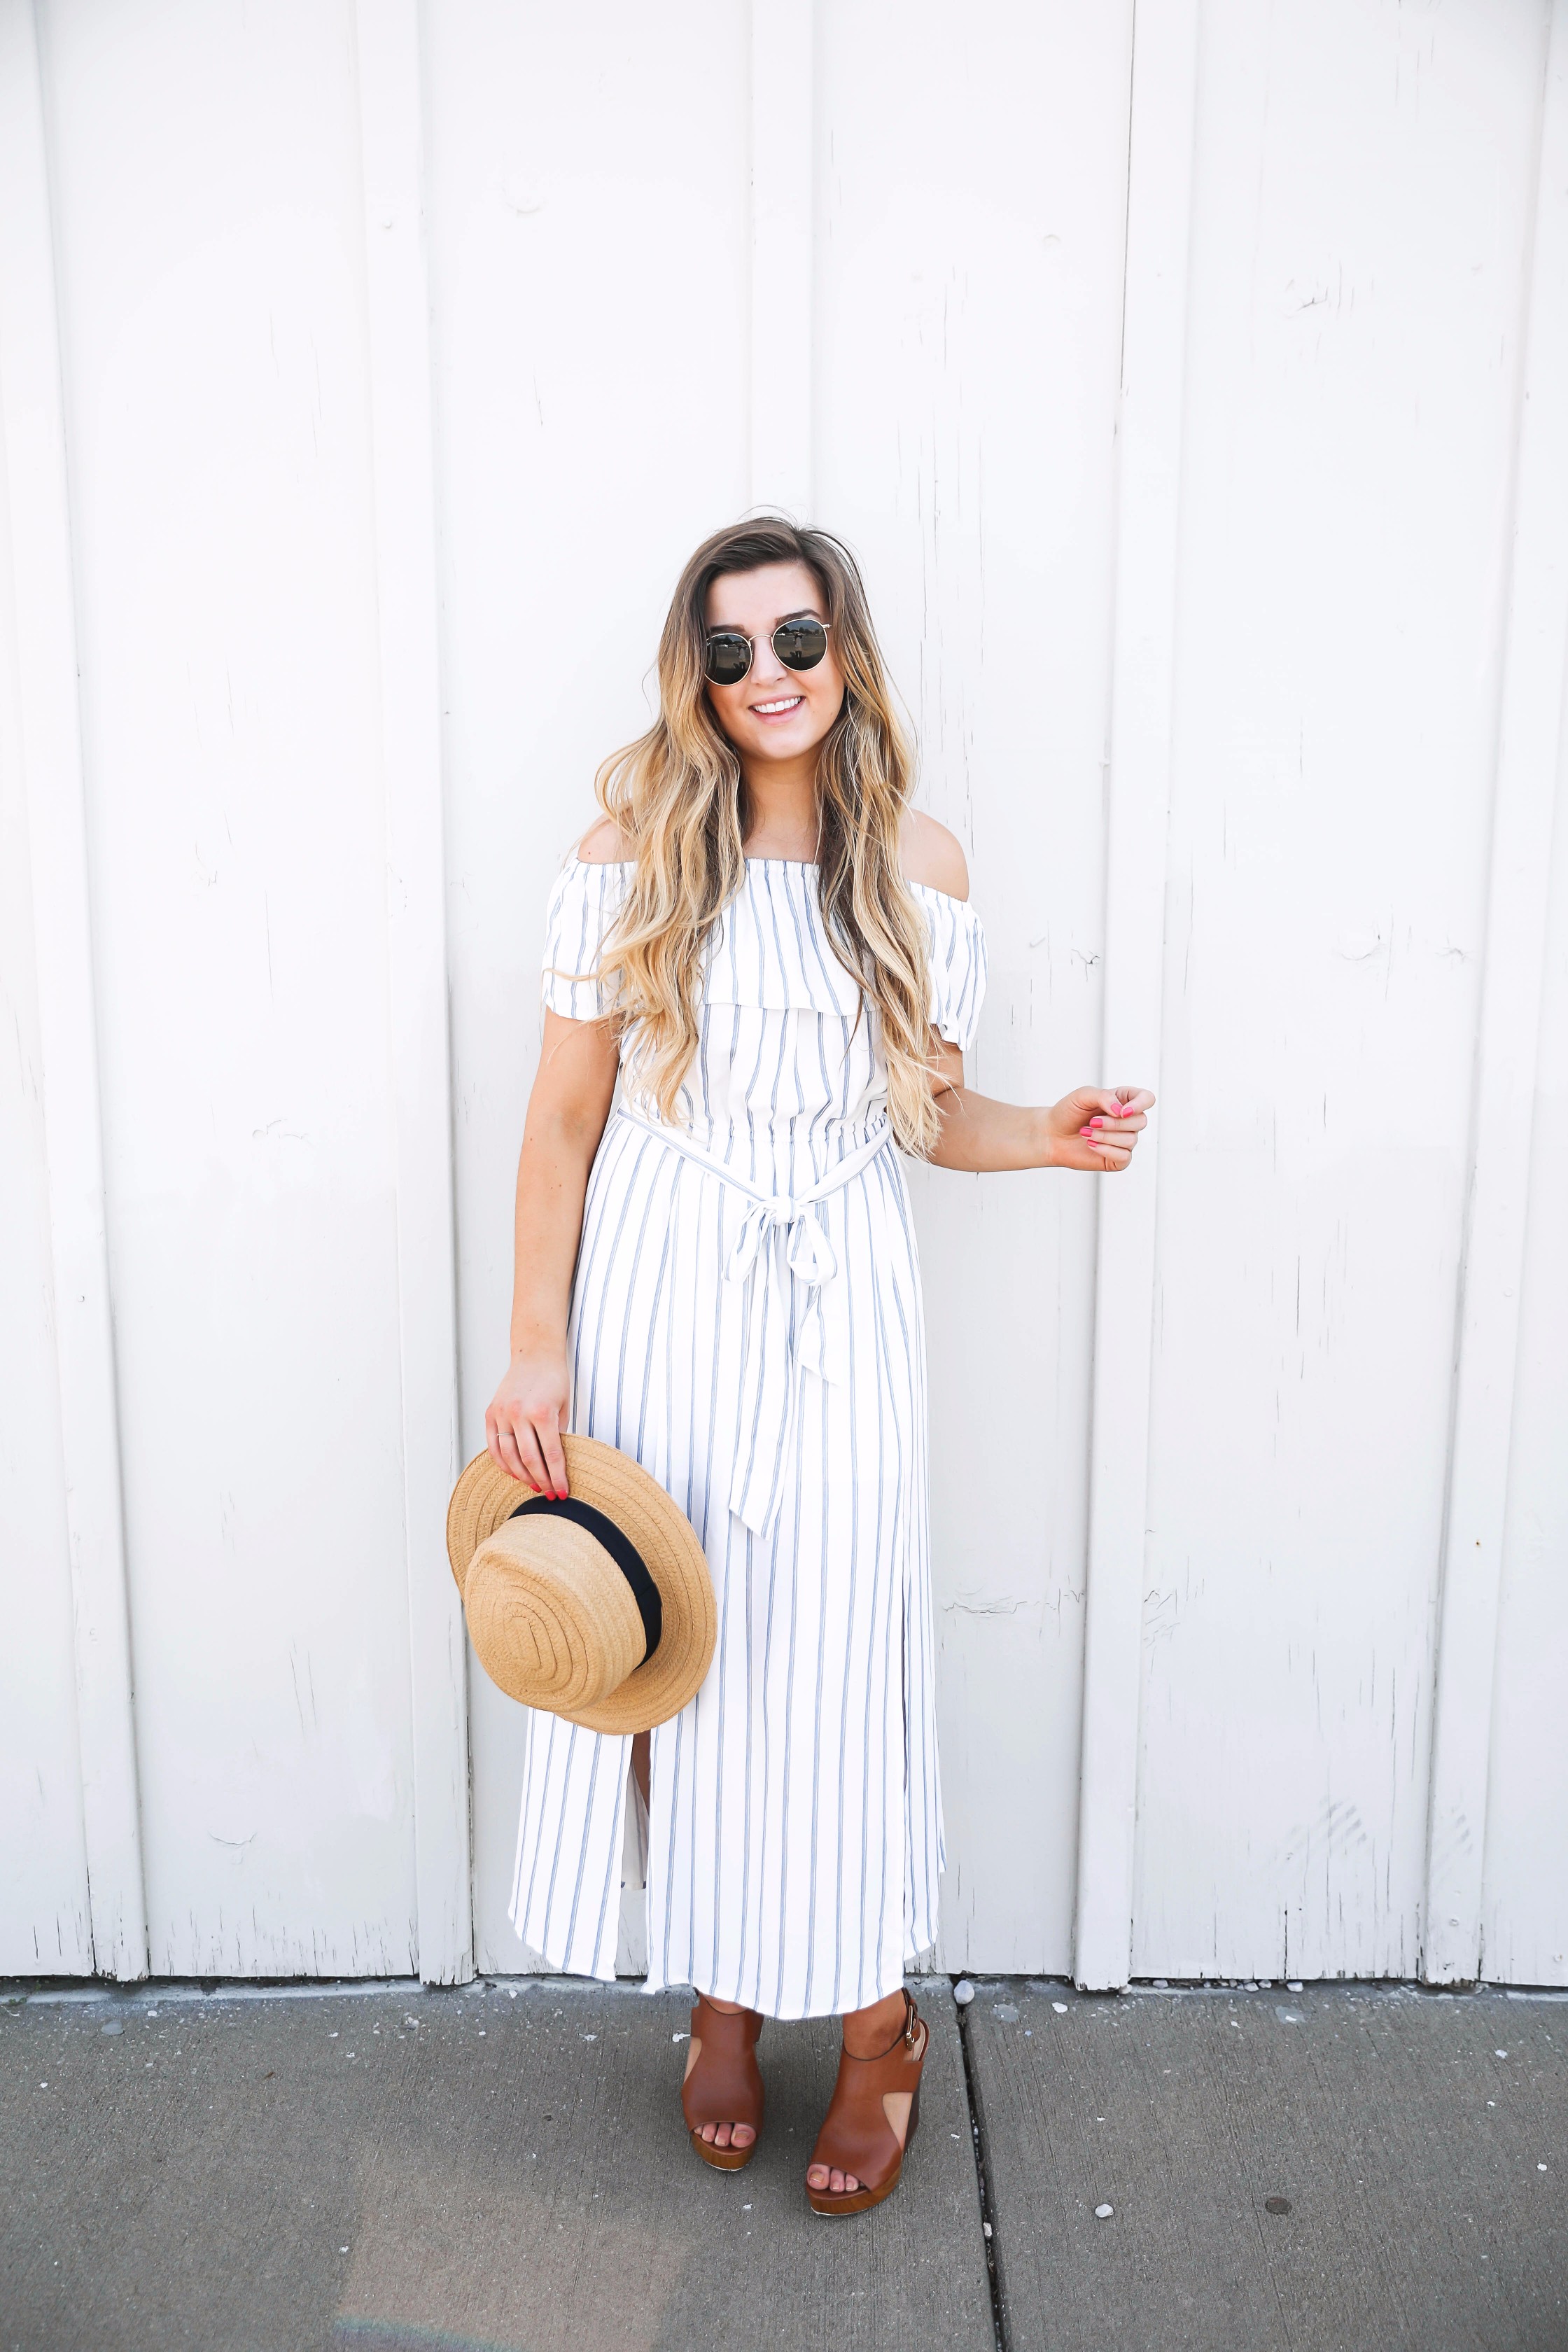 Navy and white striped off the shoulder boardwalk dress! I paired it with a cute boat hat and clubmasters! By fashion blogger daily dose of charm lauren lindmark